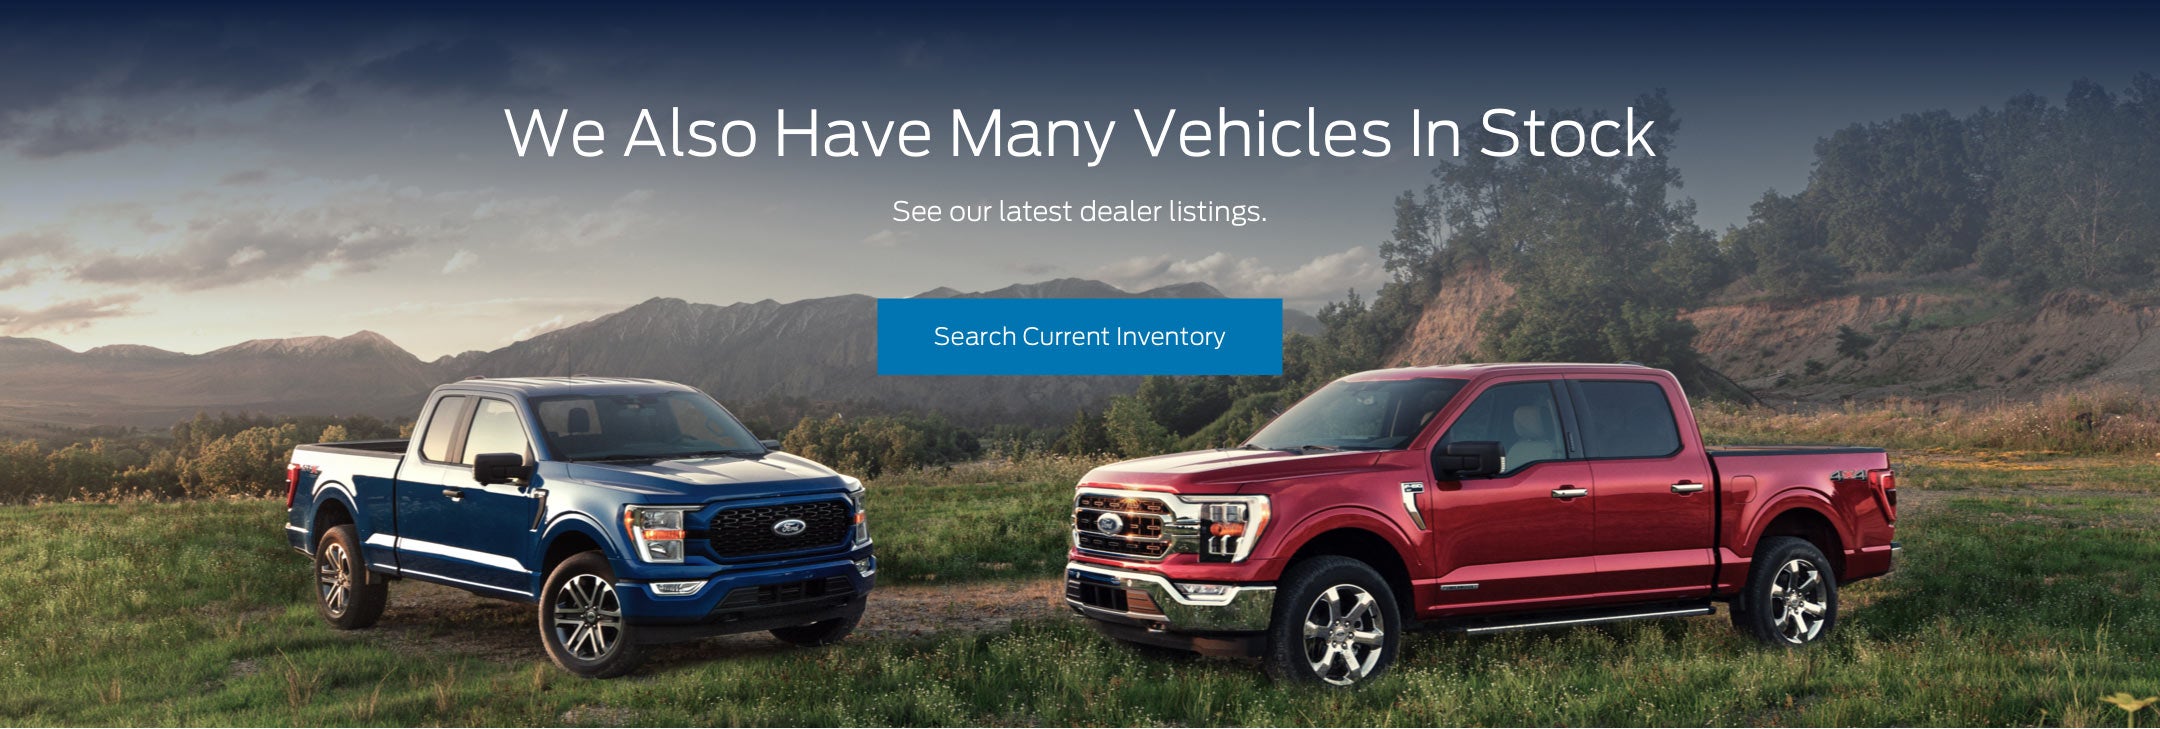 Ford vehicles in stock | Stanley Ford Gilmer in Gilmer TX